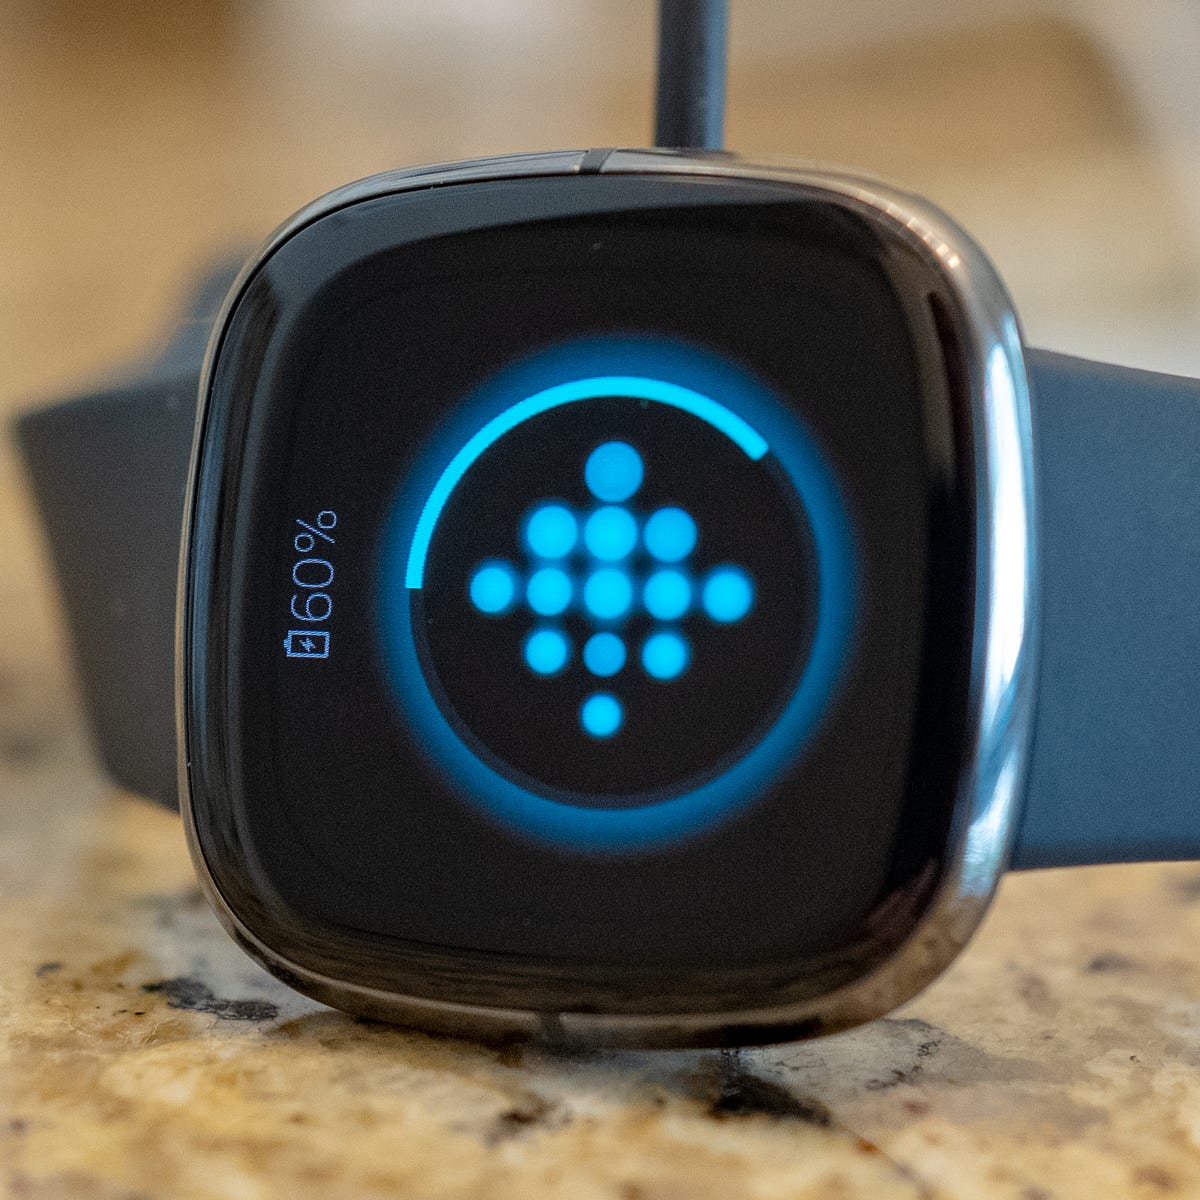 send fitbit data to apple health